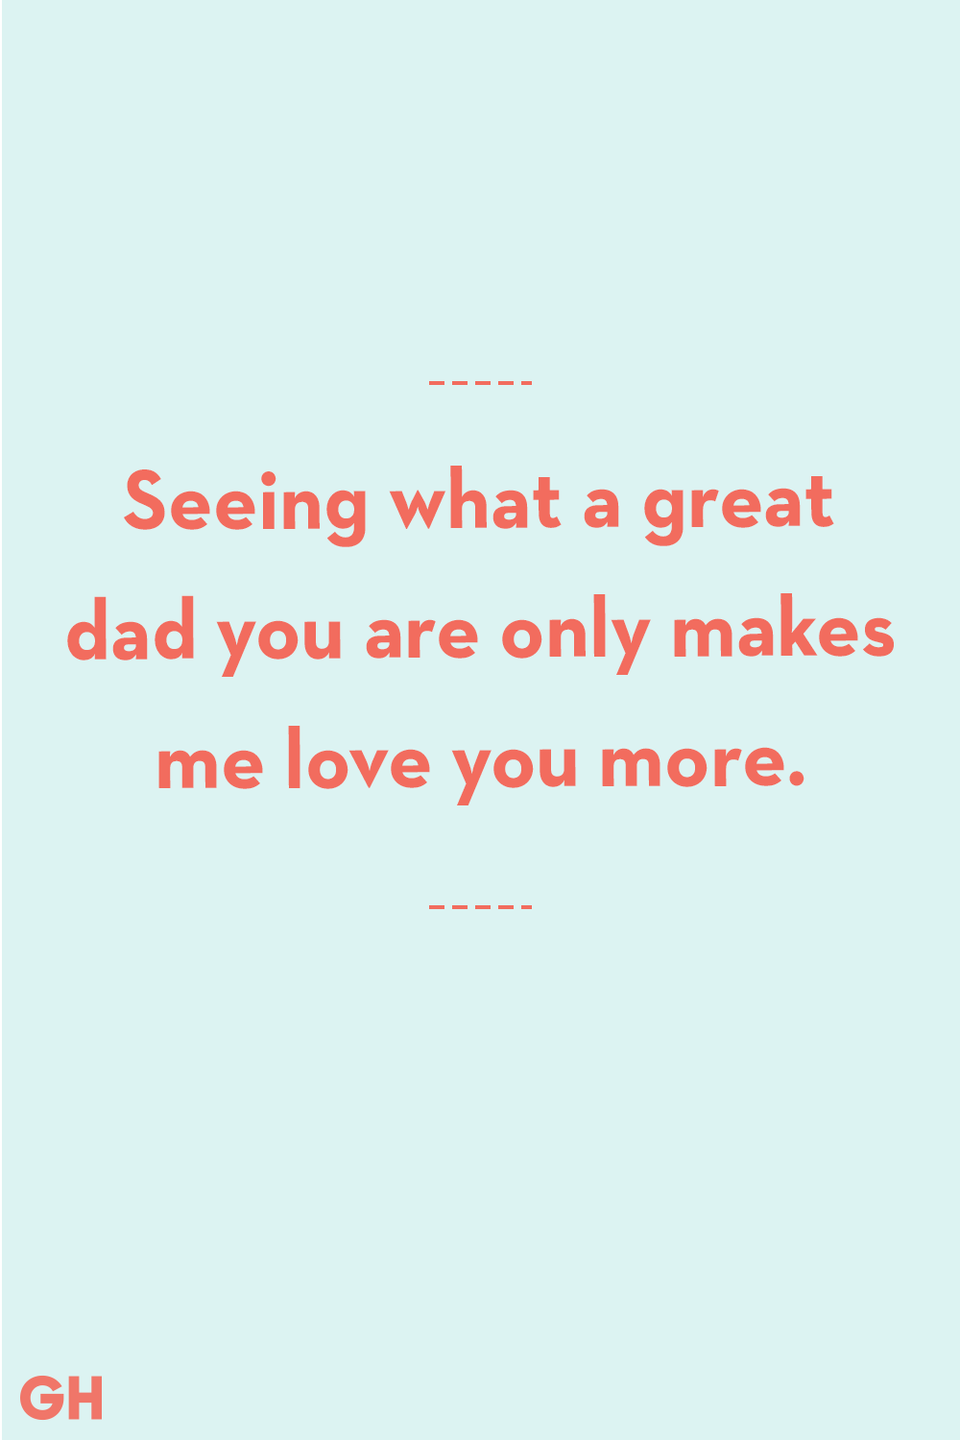 <p>Seeing what a great dad you are only makes me love you more.</p>